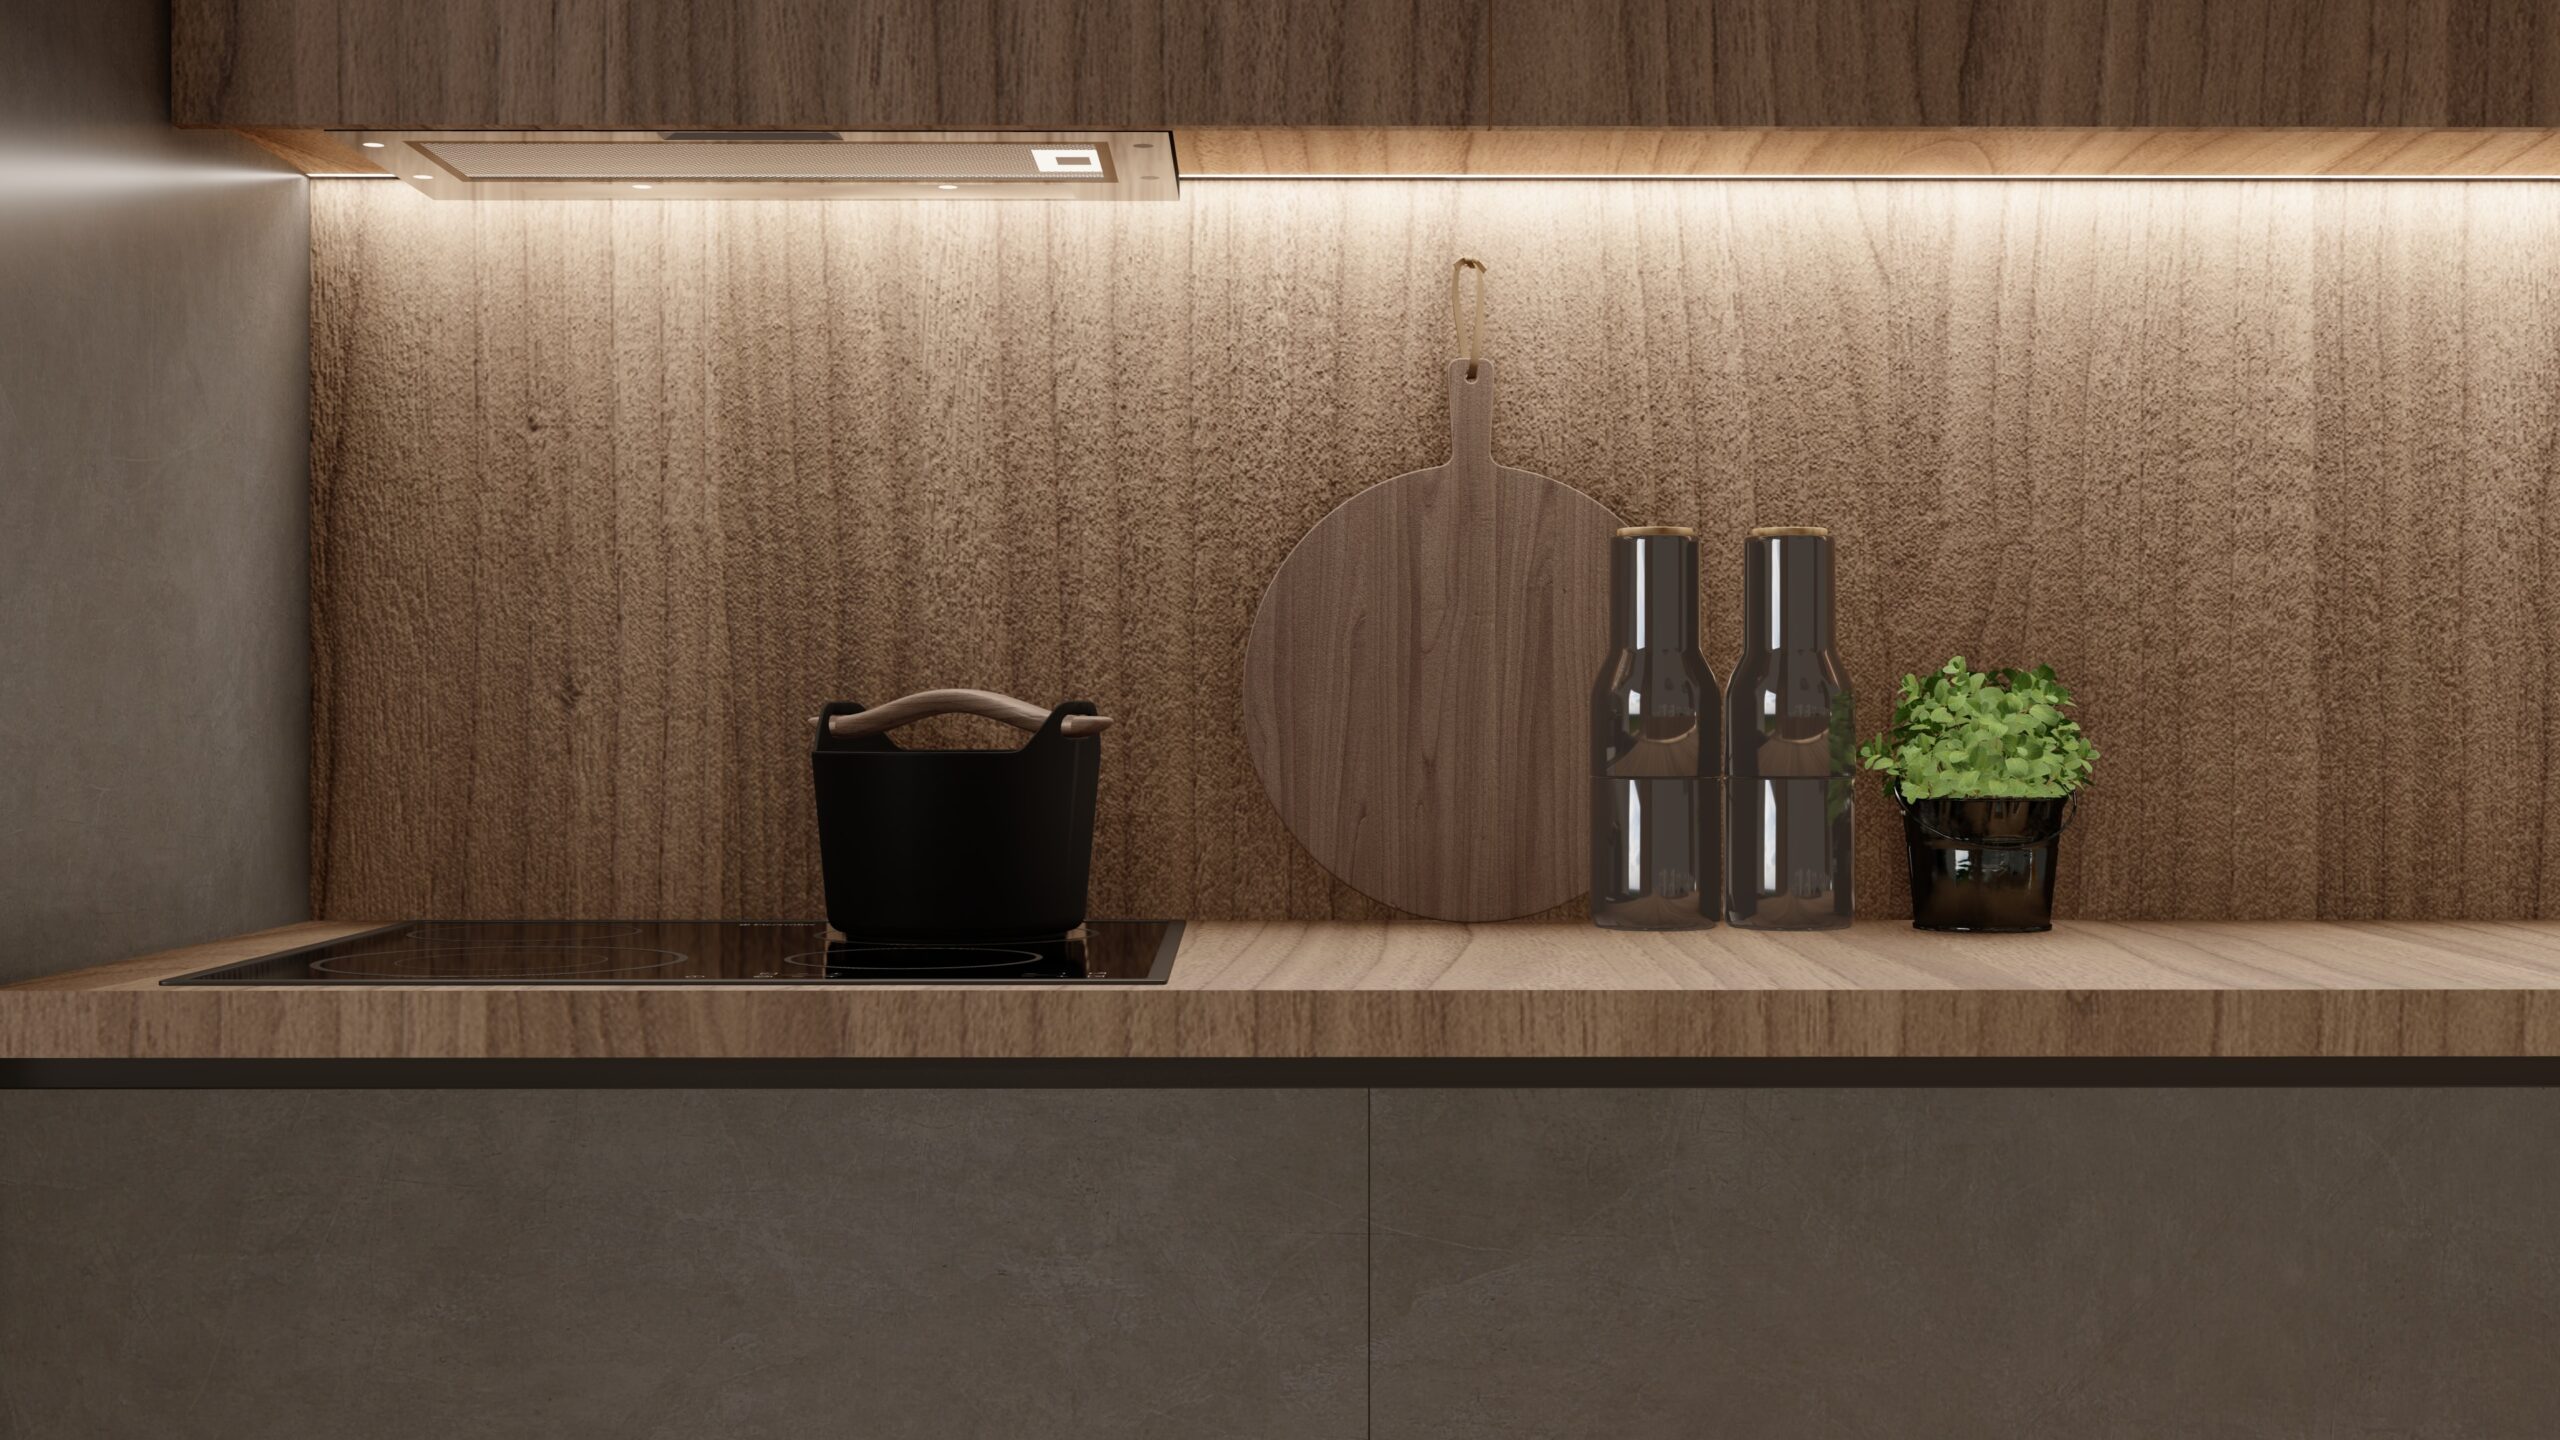 a kitchen counter with a potted plant and a cutting board